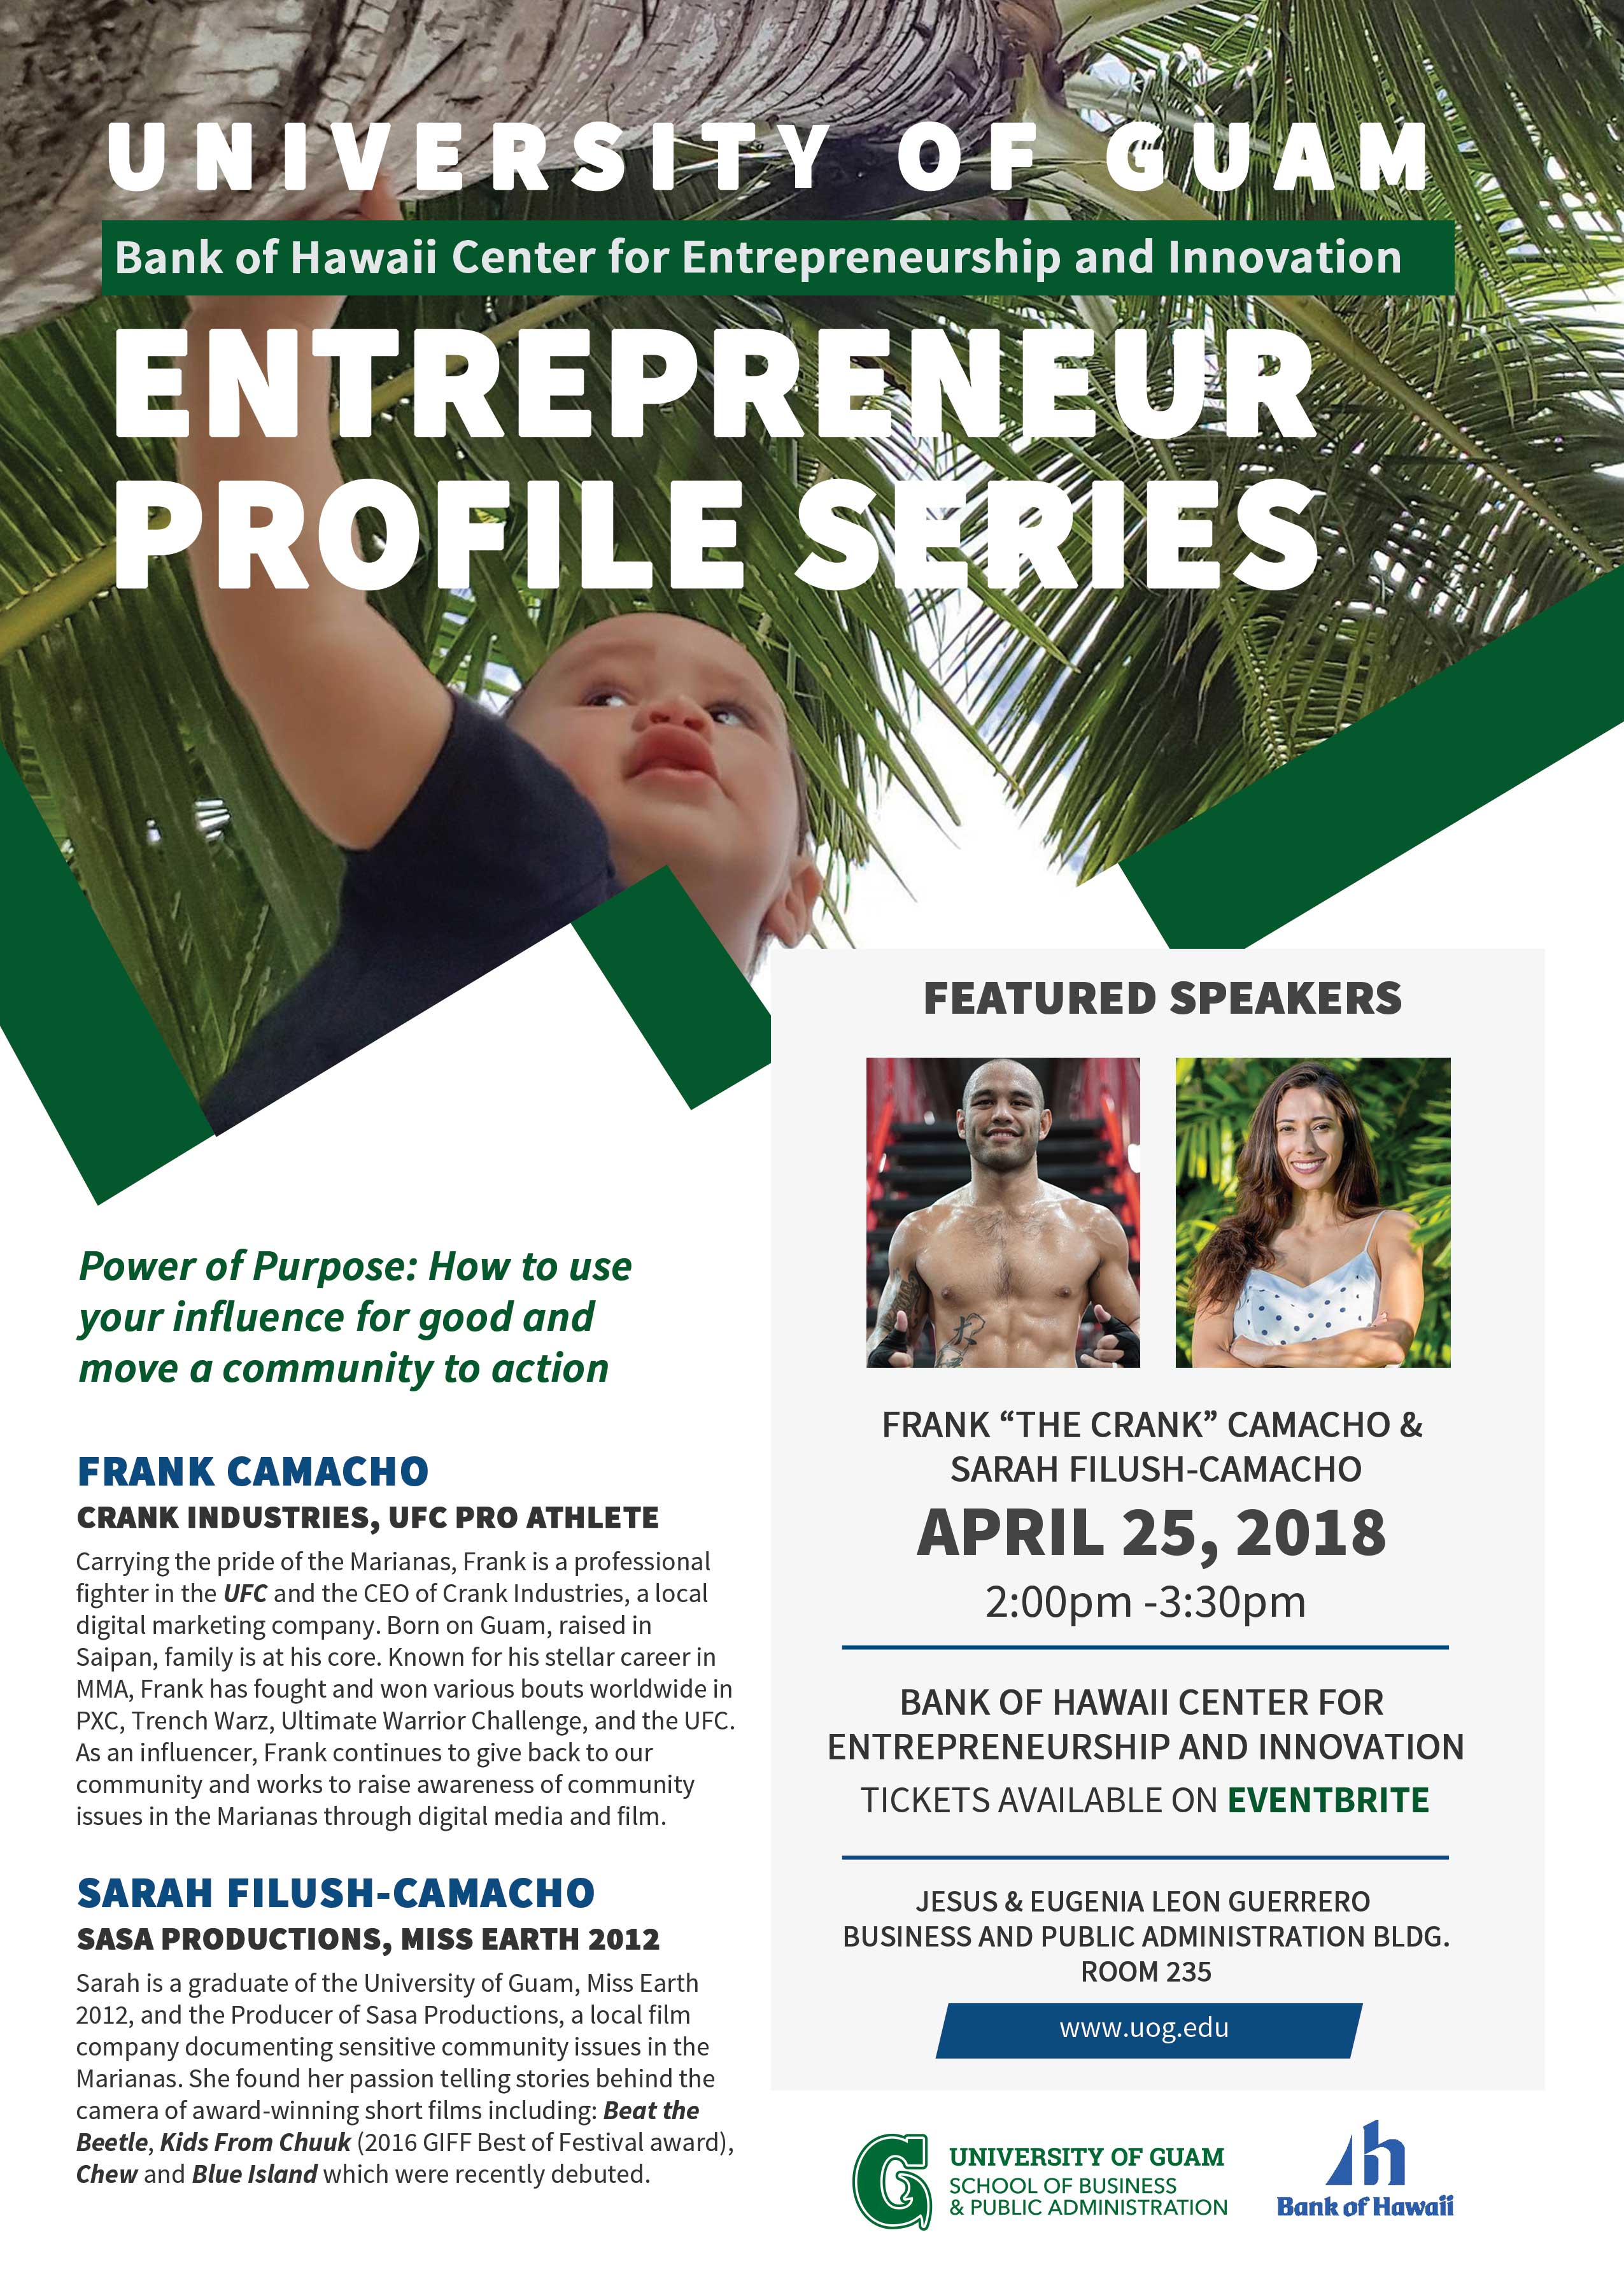 The University of Guam Bank of Hawaii Center for Entrepreneurship and Innovation (C4EI) invites you to join us in welcoming Frank "The Crank" Camacho and Sarah Filush-Camacho.